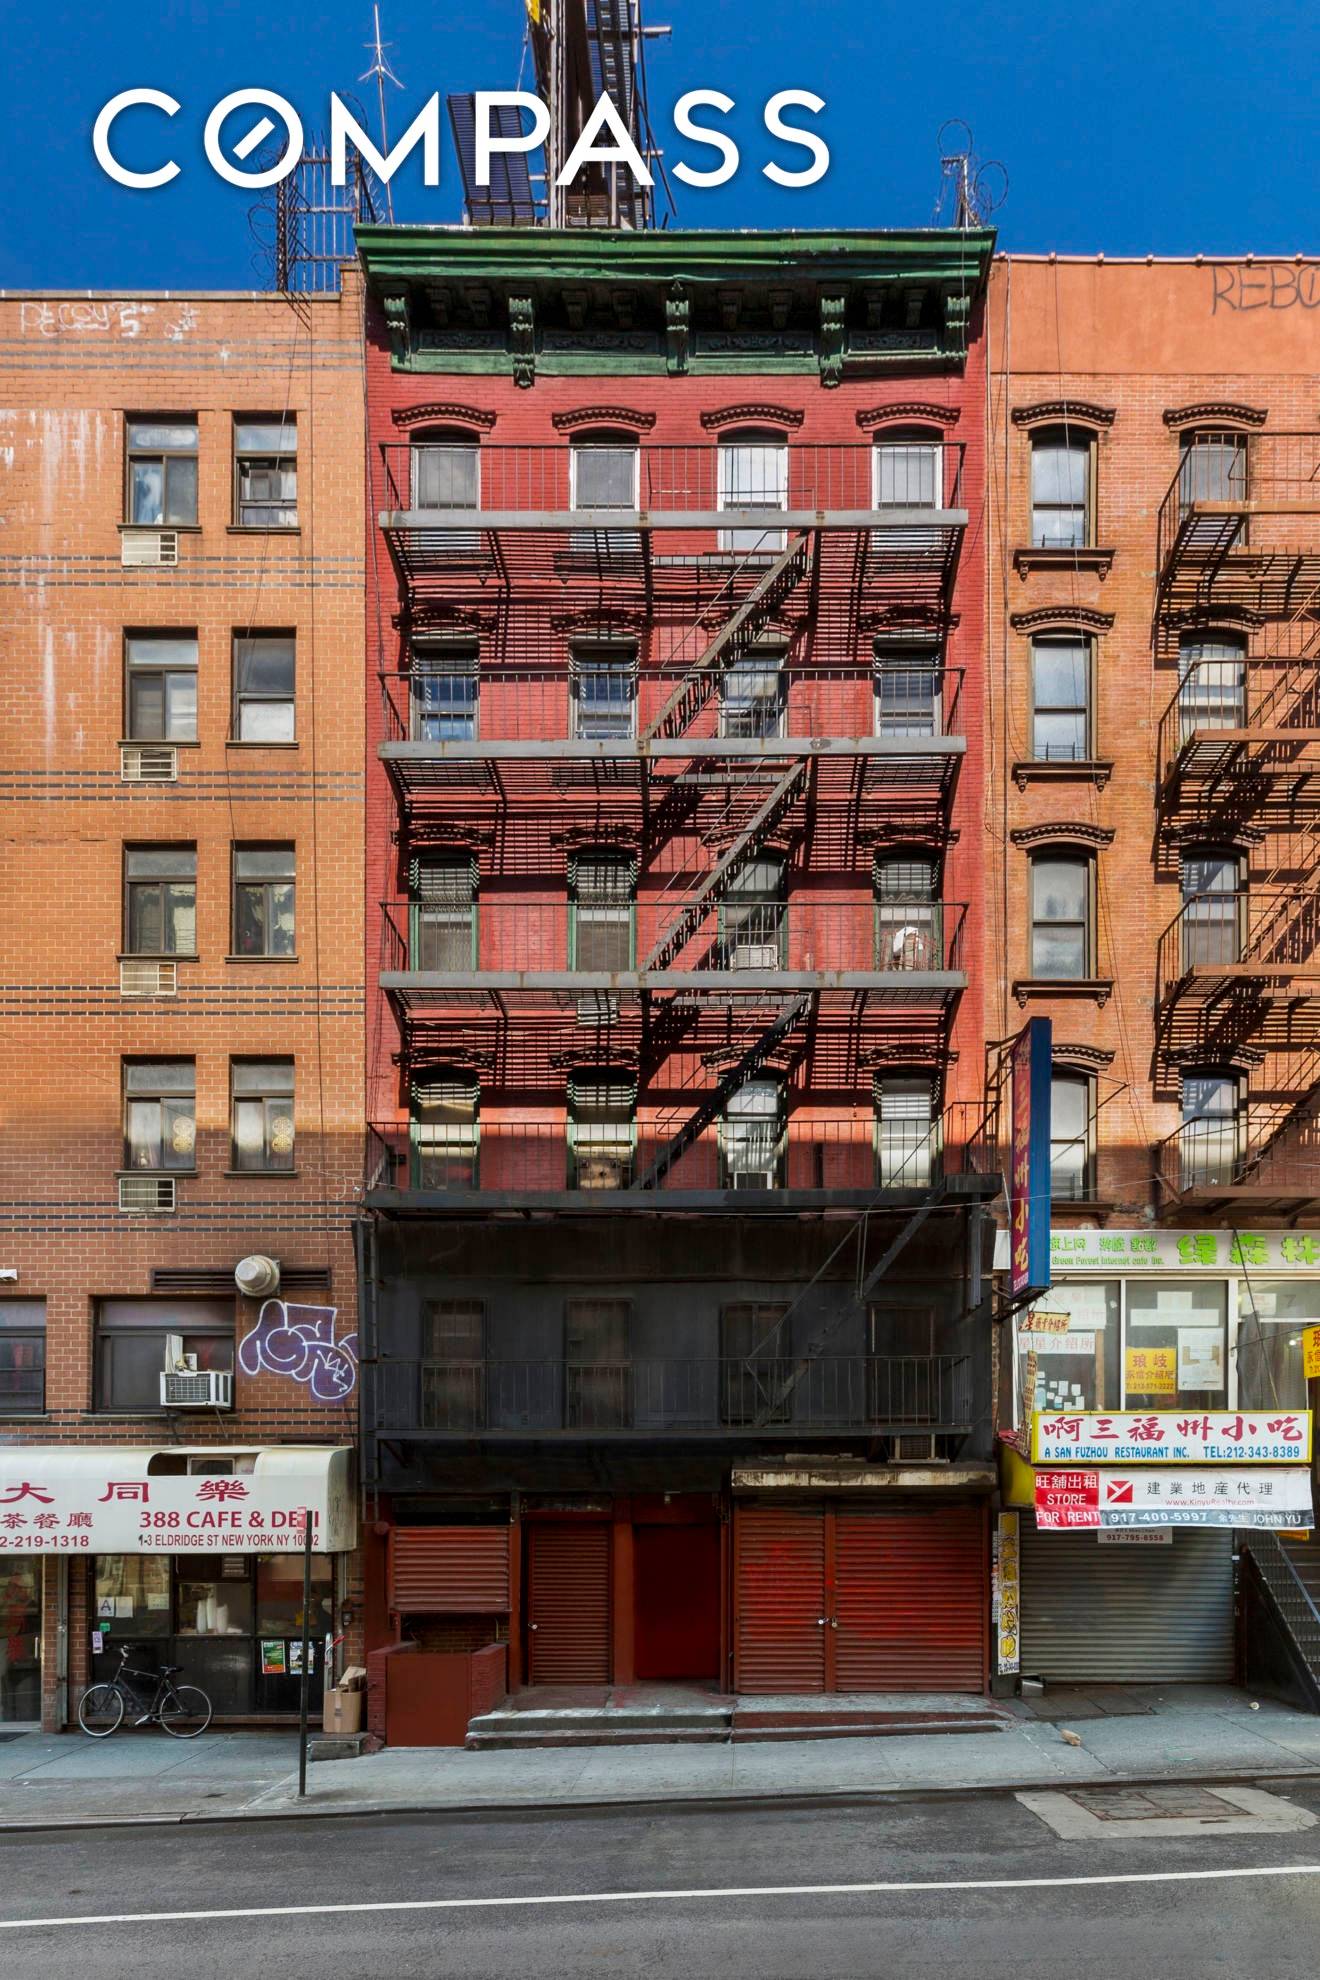 5 Eldridge Street is a six story, 8, 370 square foot property located in the heart of Two Bridges in Lower Manhattan.